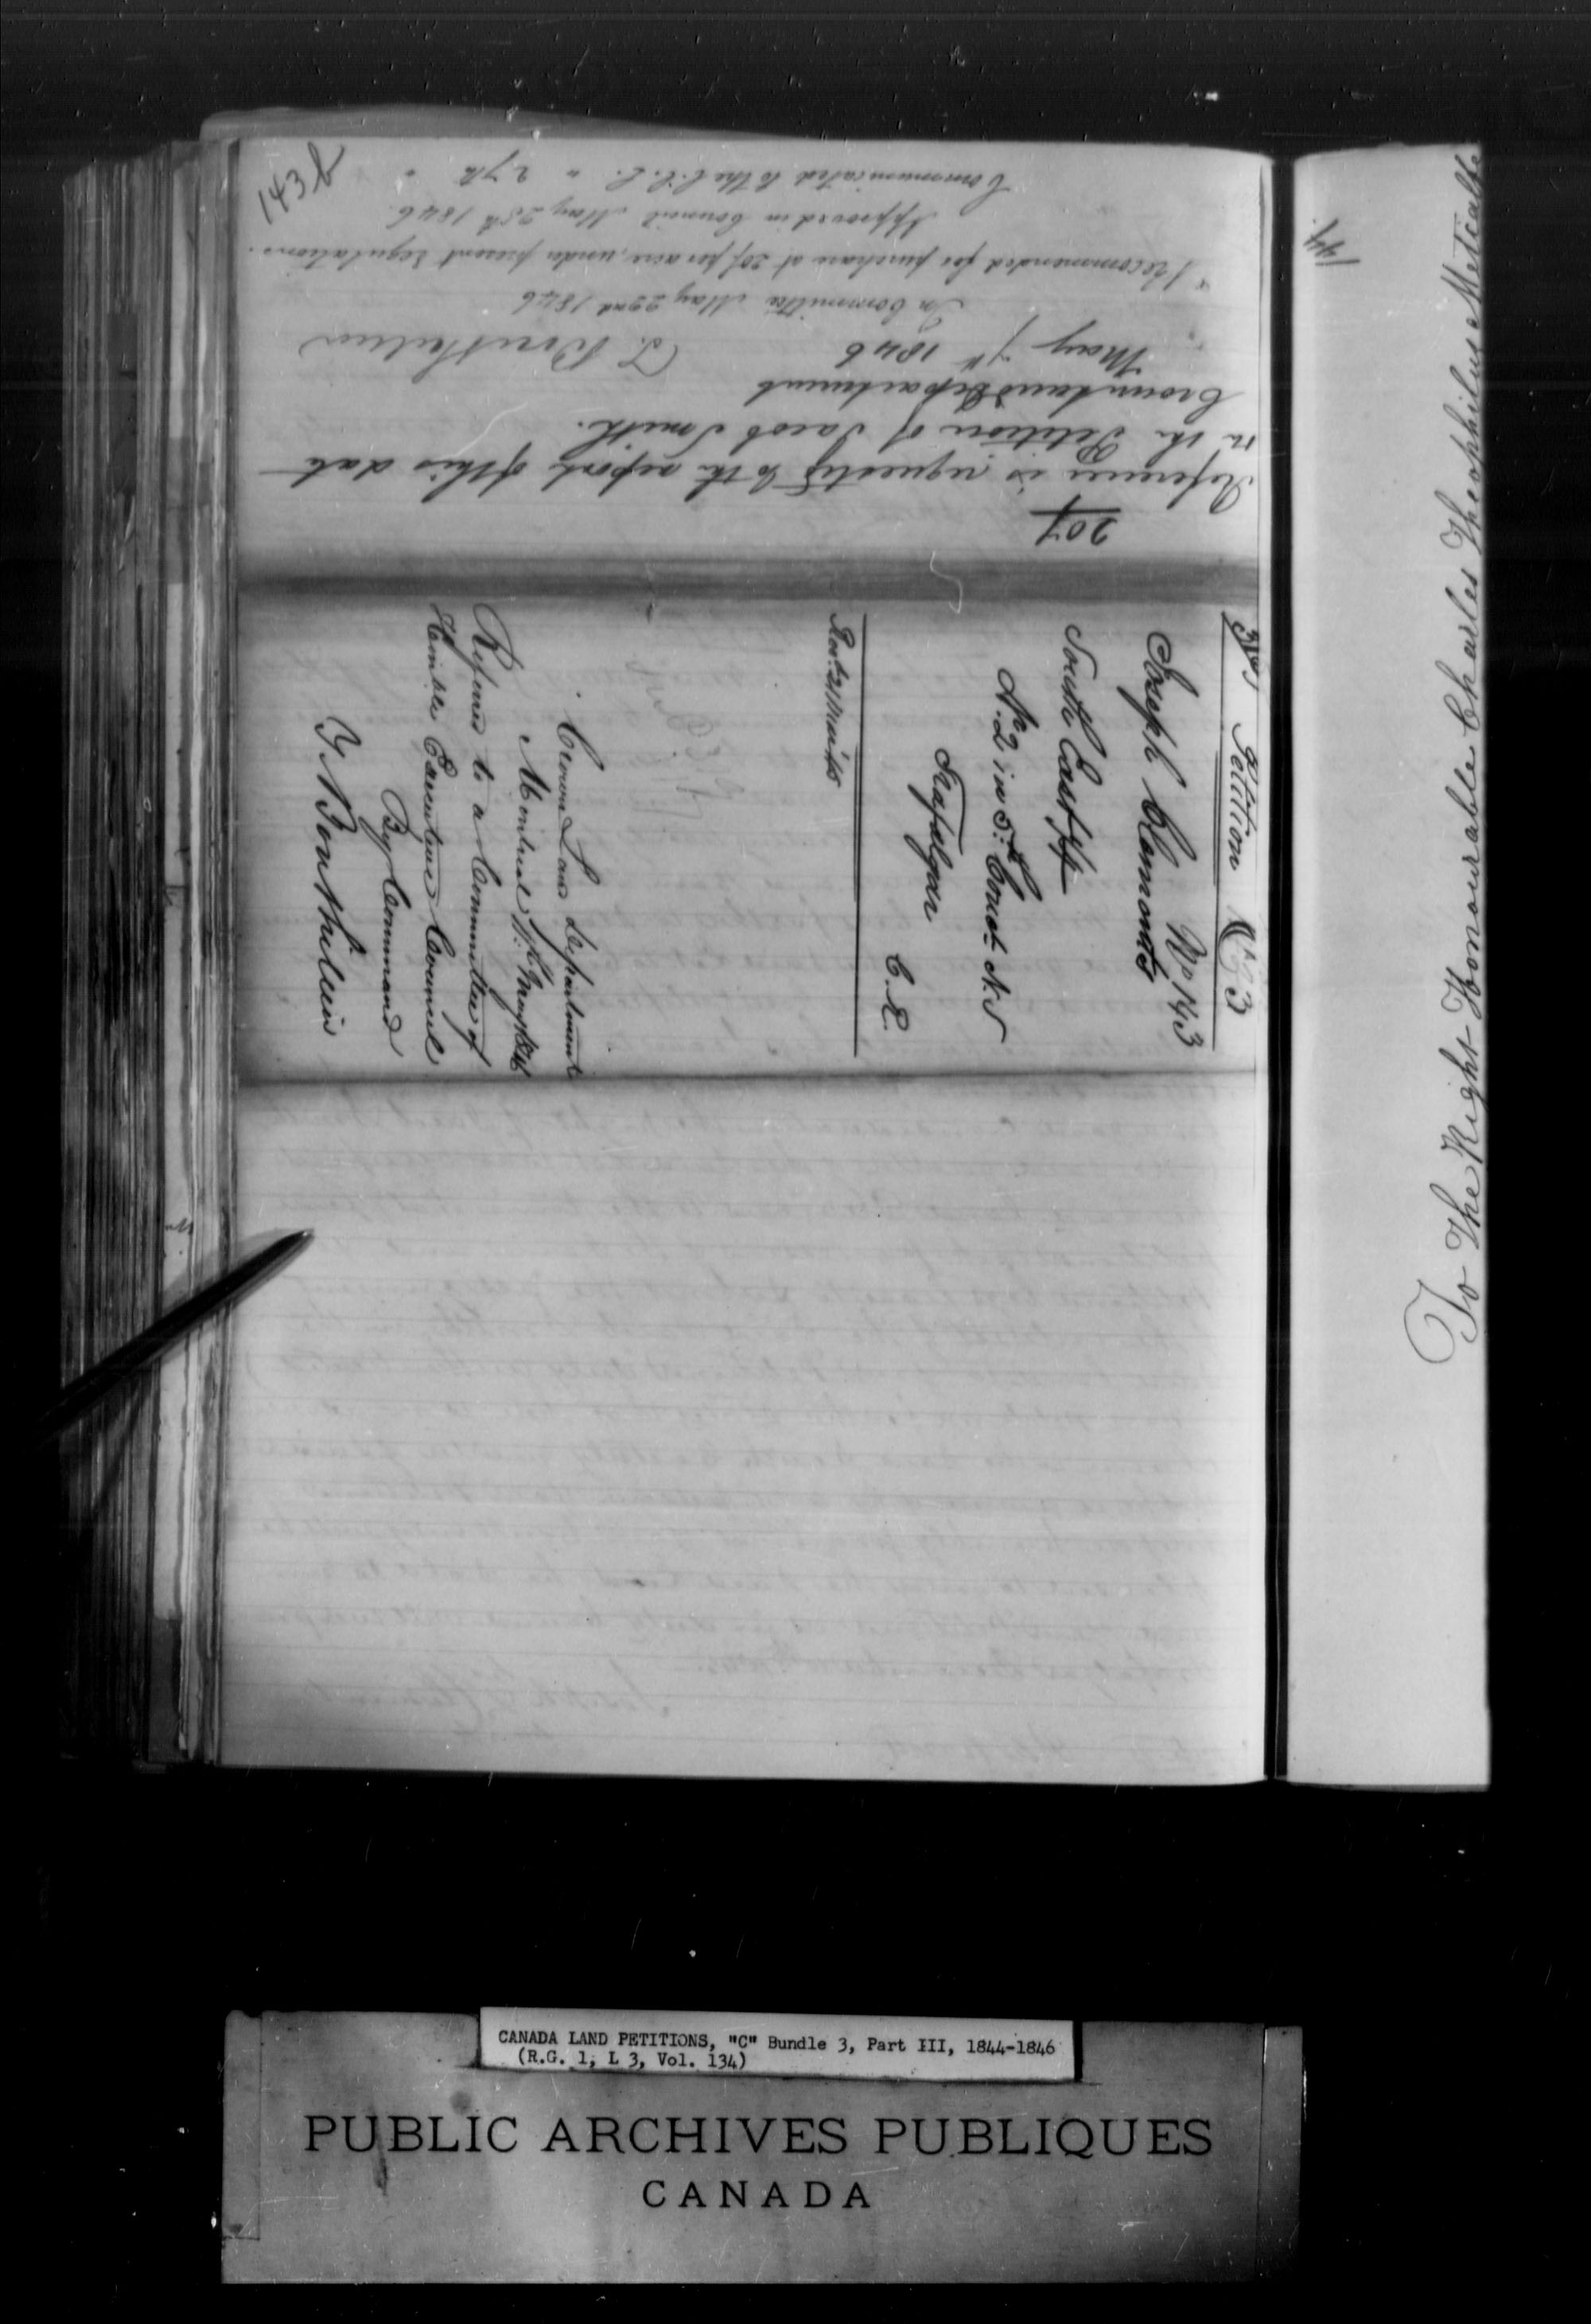 Title: Upper Canada Land Petitions (1763-1865) - Mikan Number: 205131 - Microform: c-1735